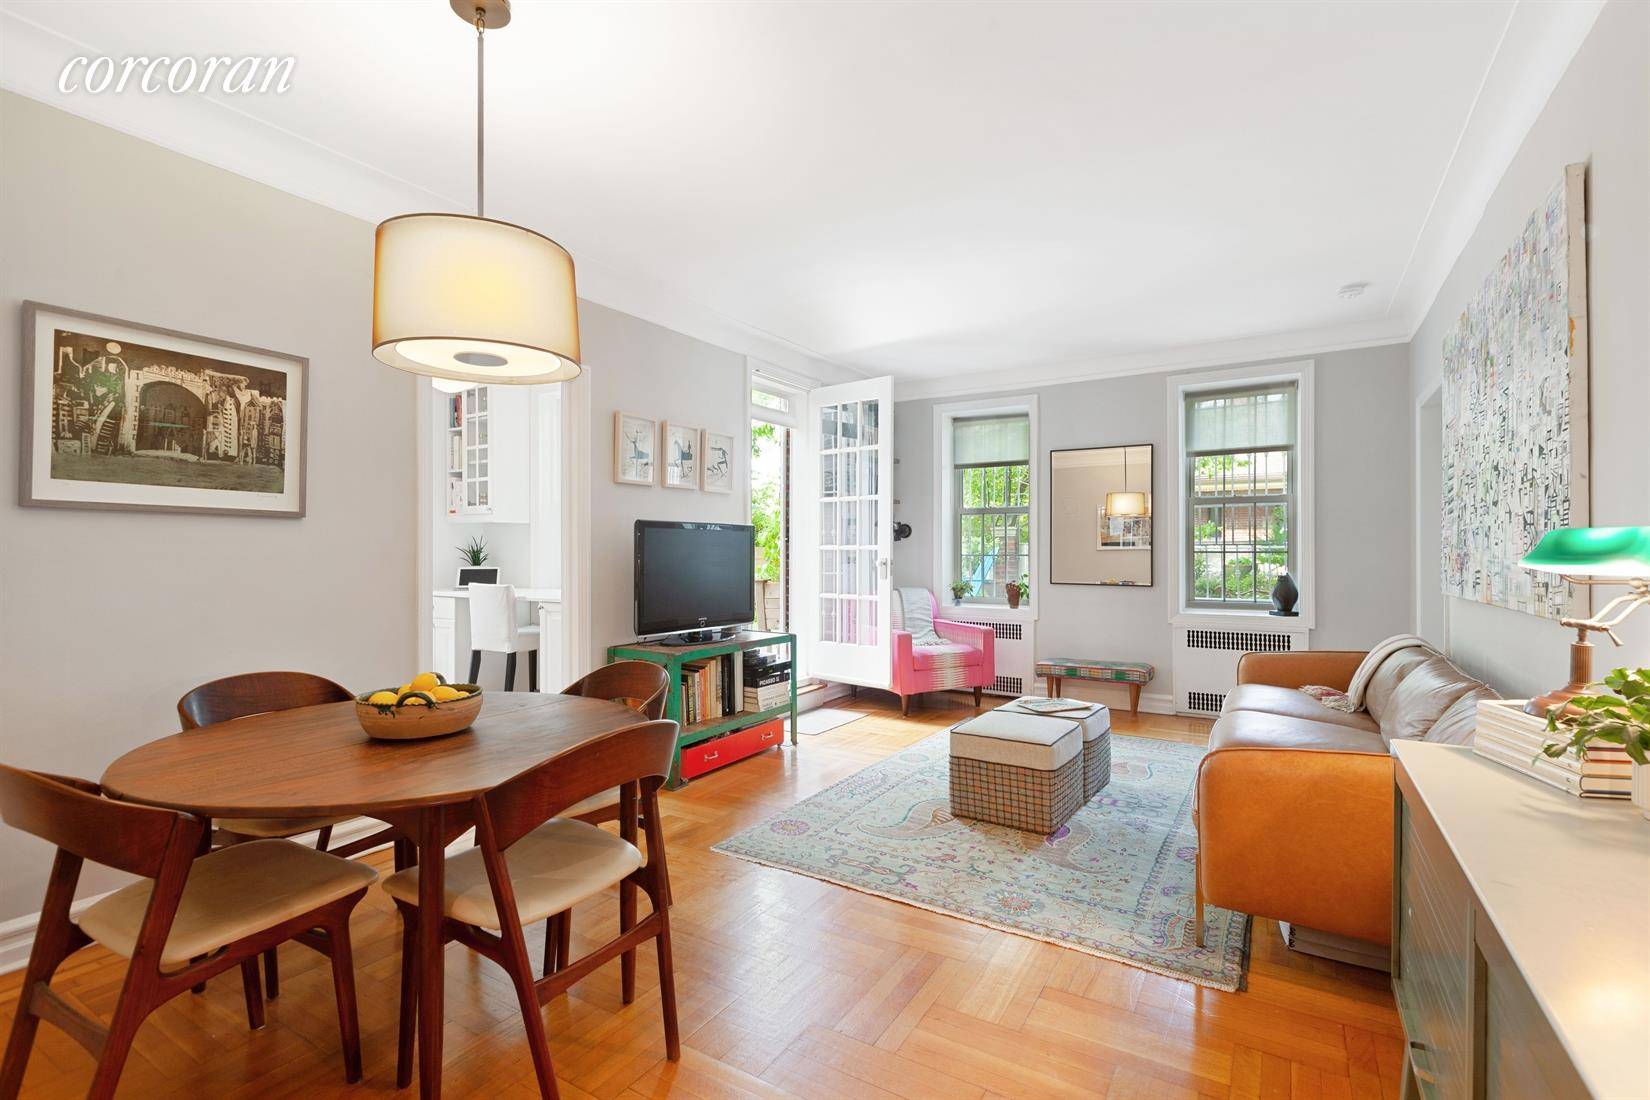 SHINES BRIGHT ! Ultra rare two bedroom coop with three exposures and a 520 SF private terrace.